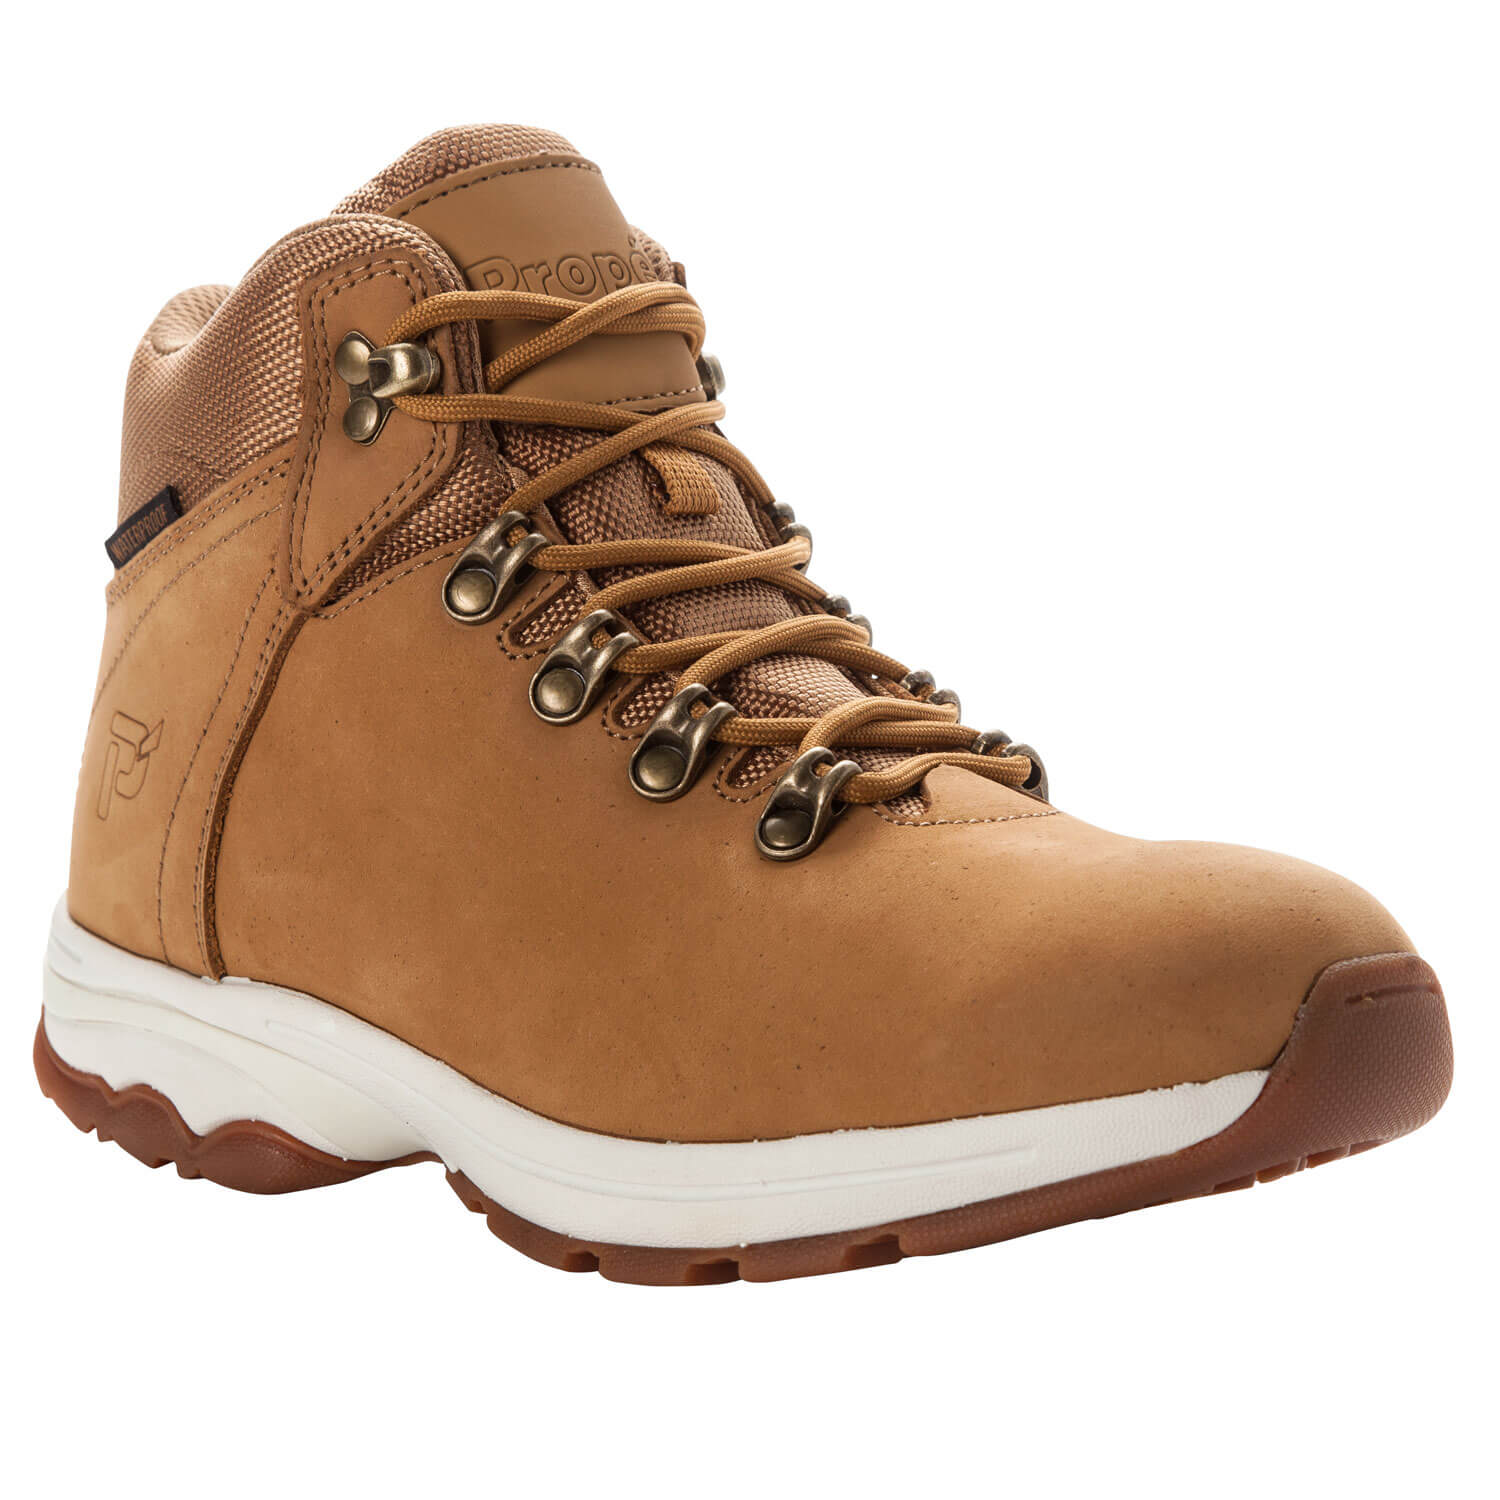 Buy > womens light weight hiking boots > in stock